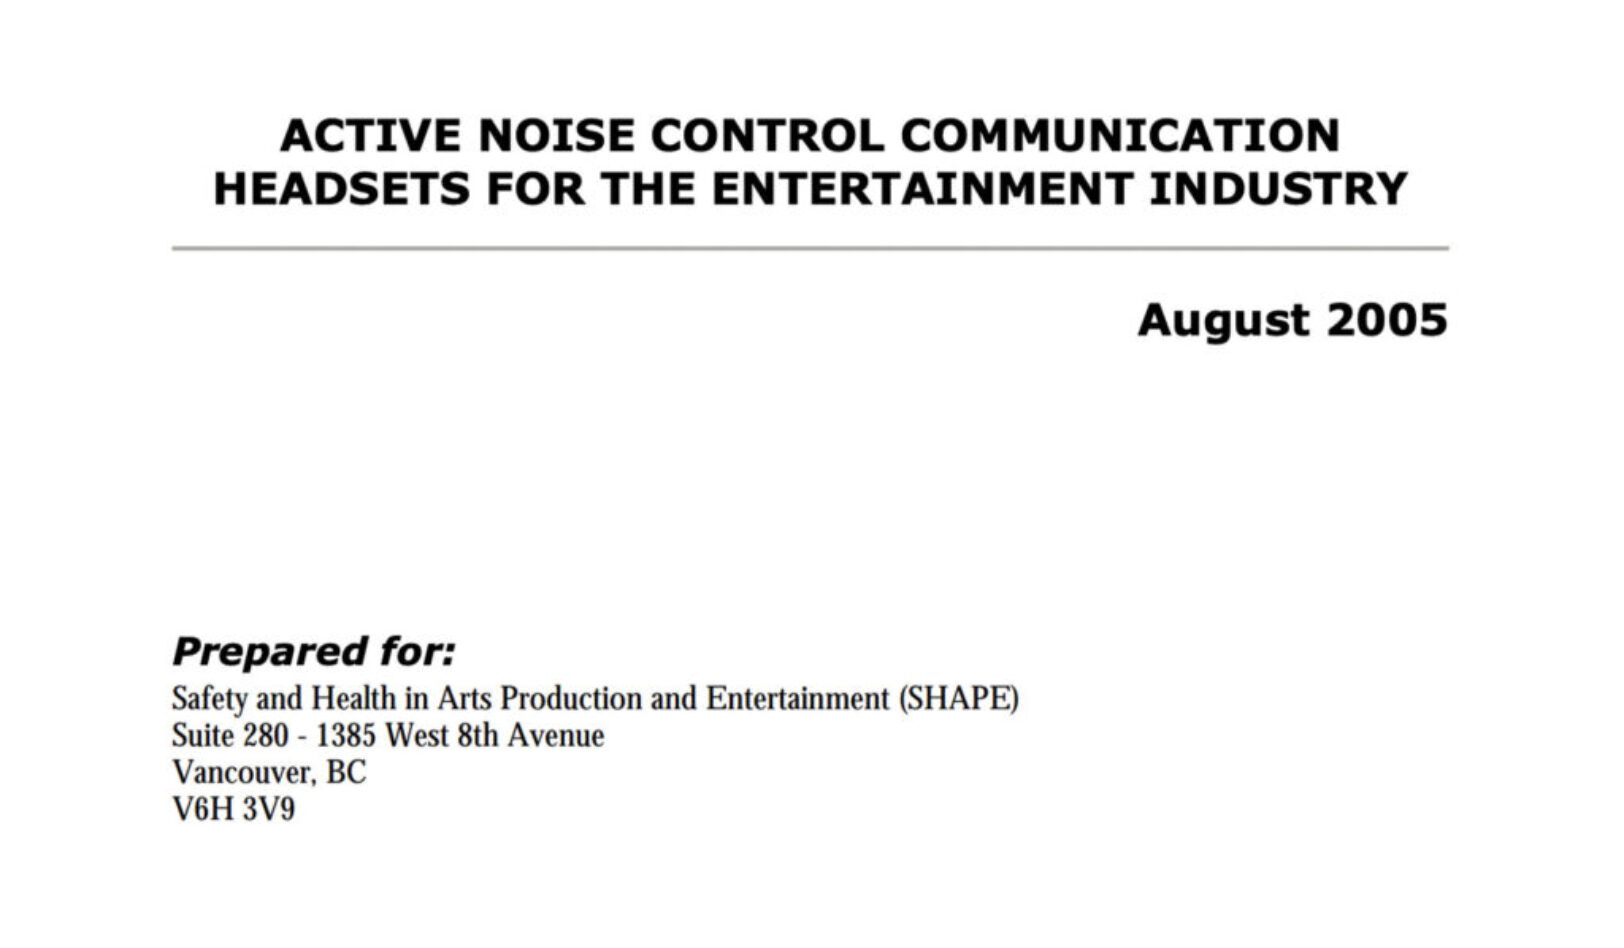 Active Noise Control Communication Headsets for the Entertainment Industry Report